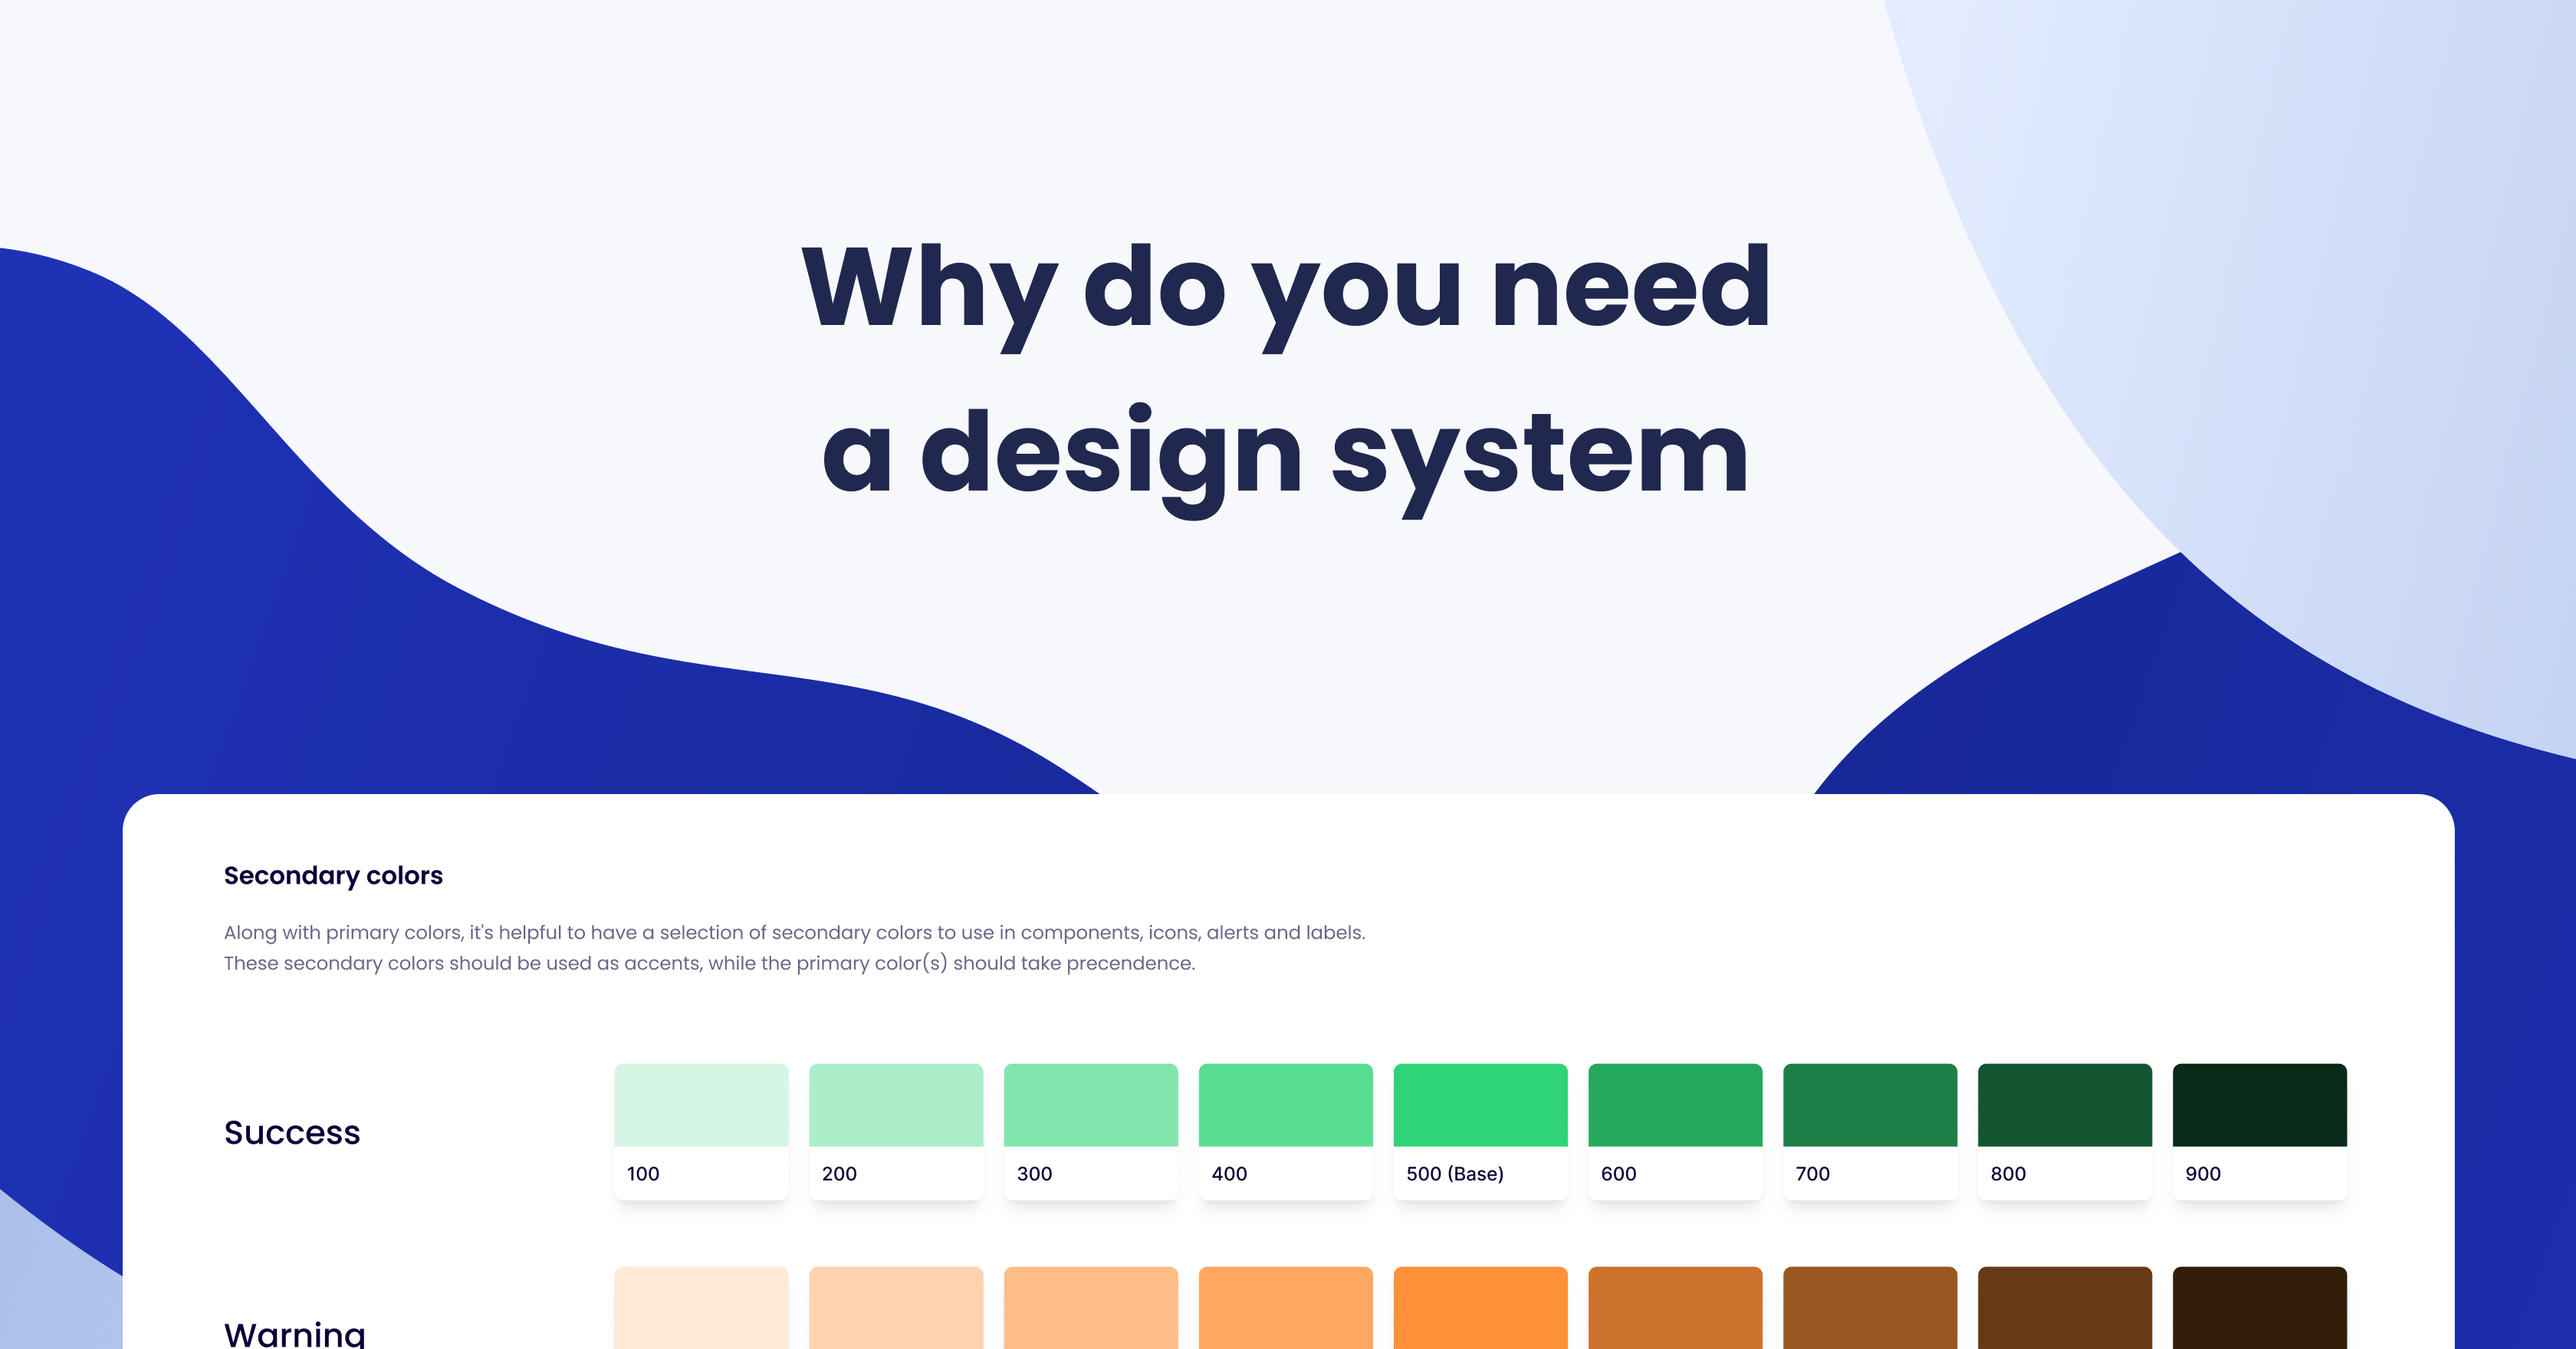 Nightborn - Why do you need a design system